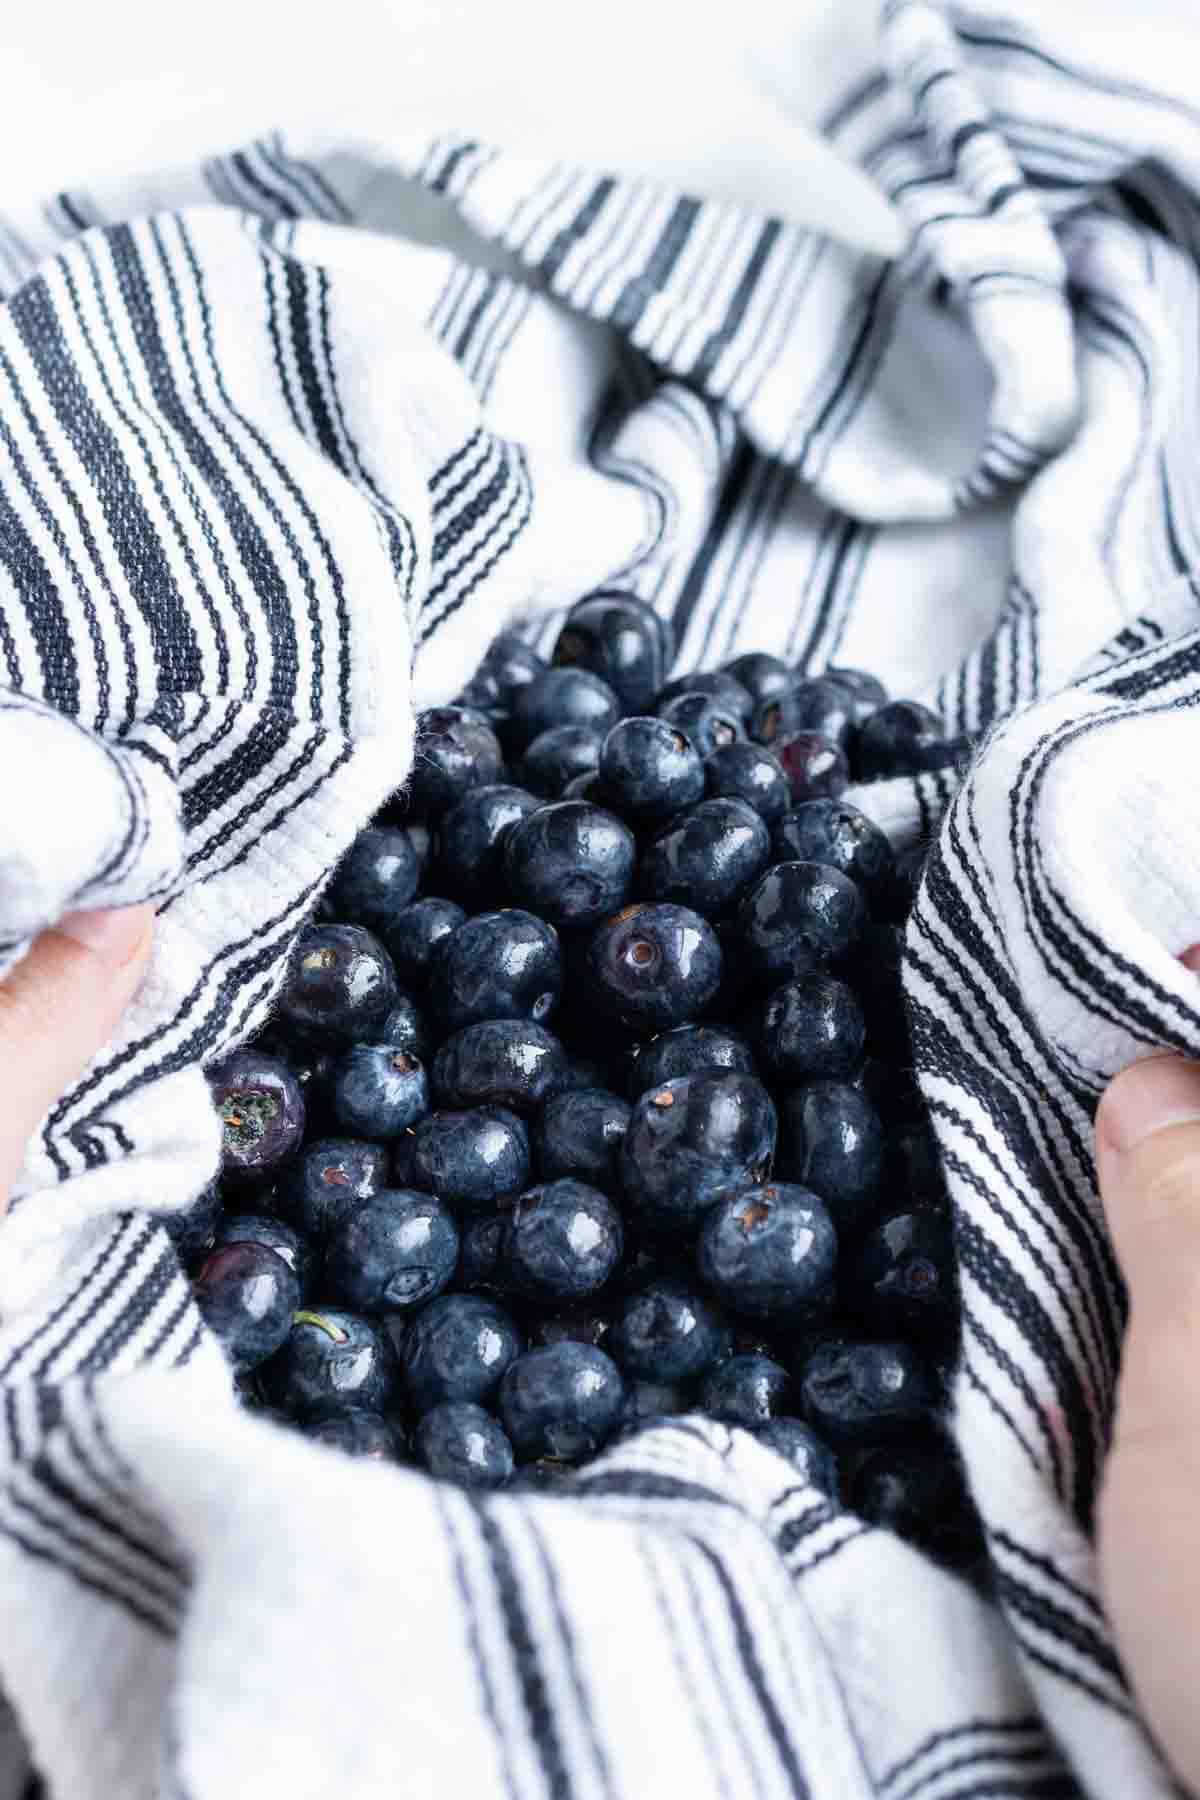 A towel is used to dry blueberries before freezing.